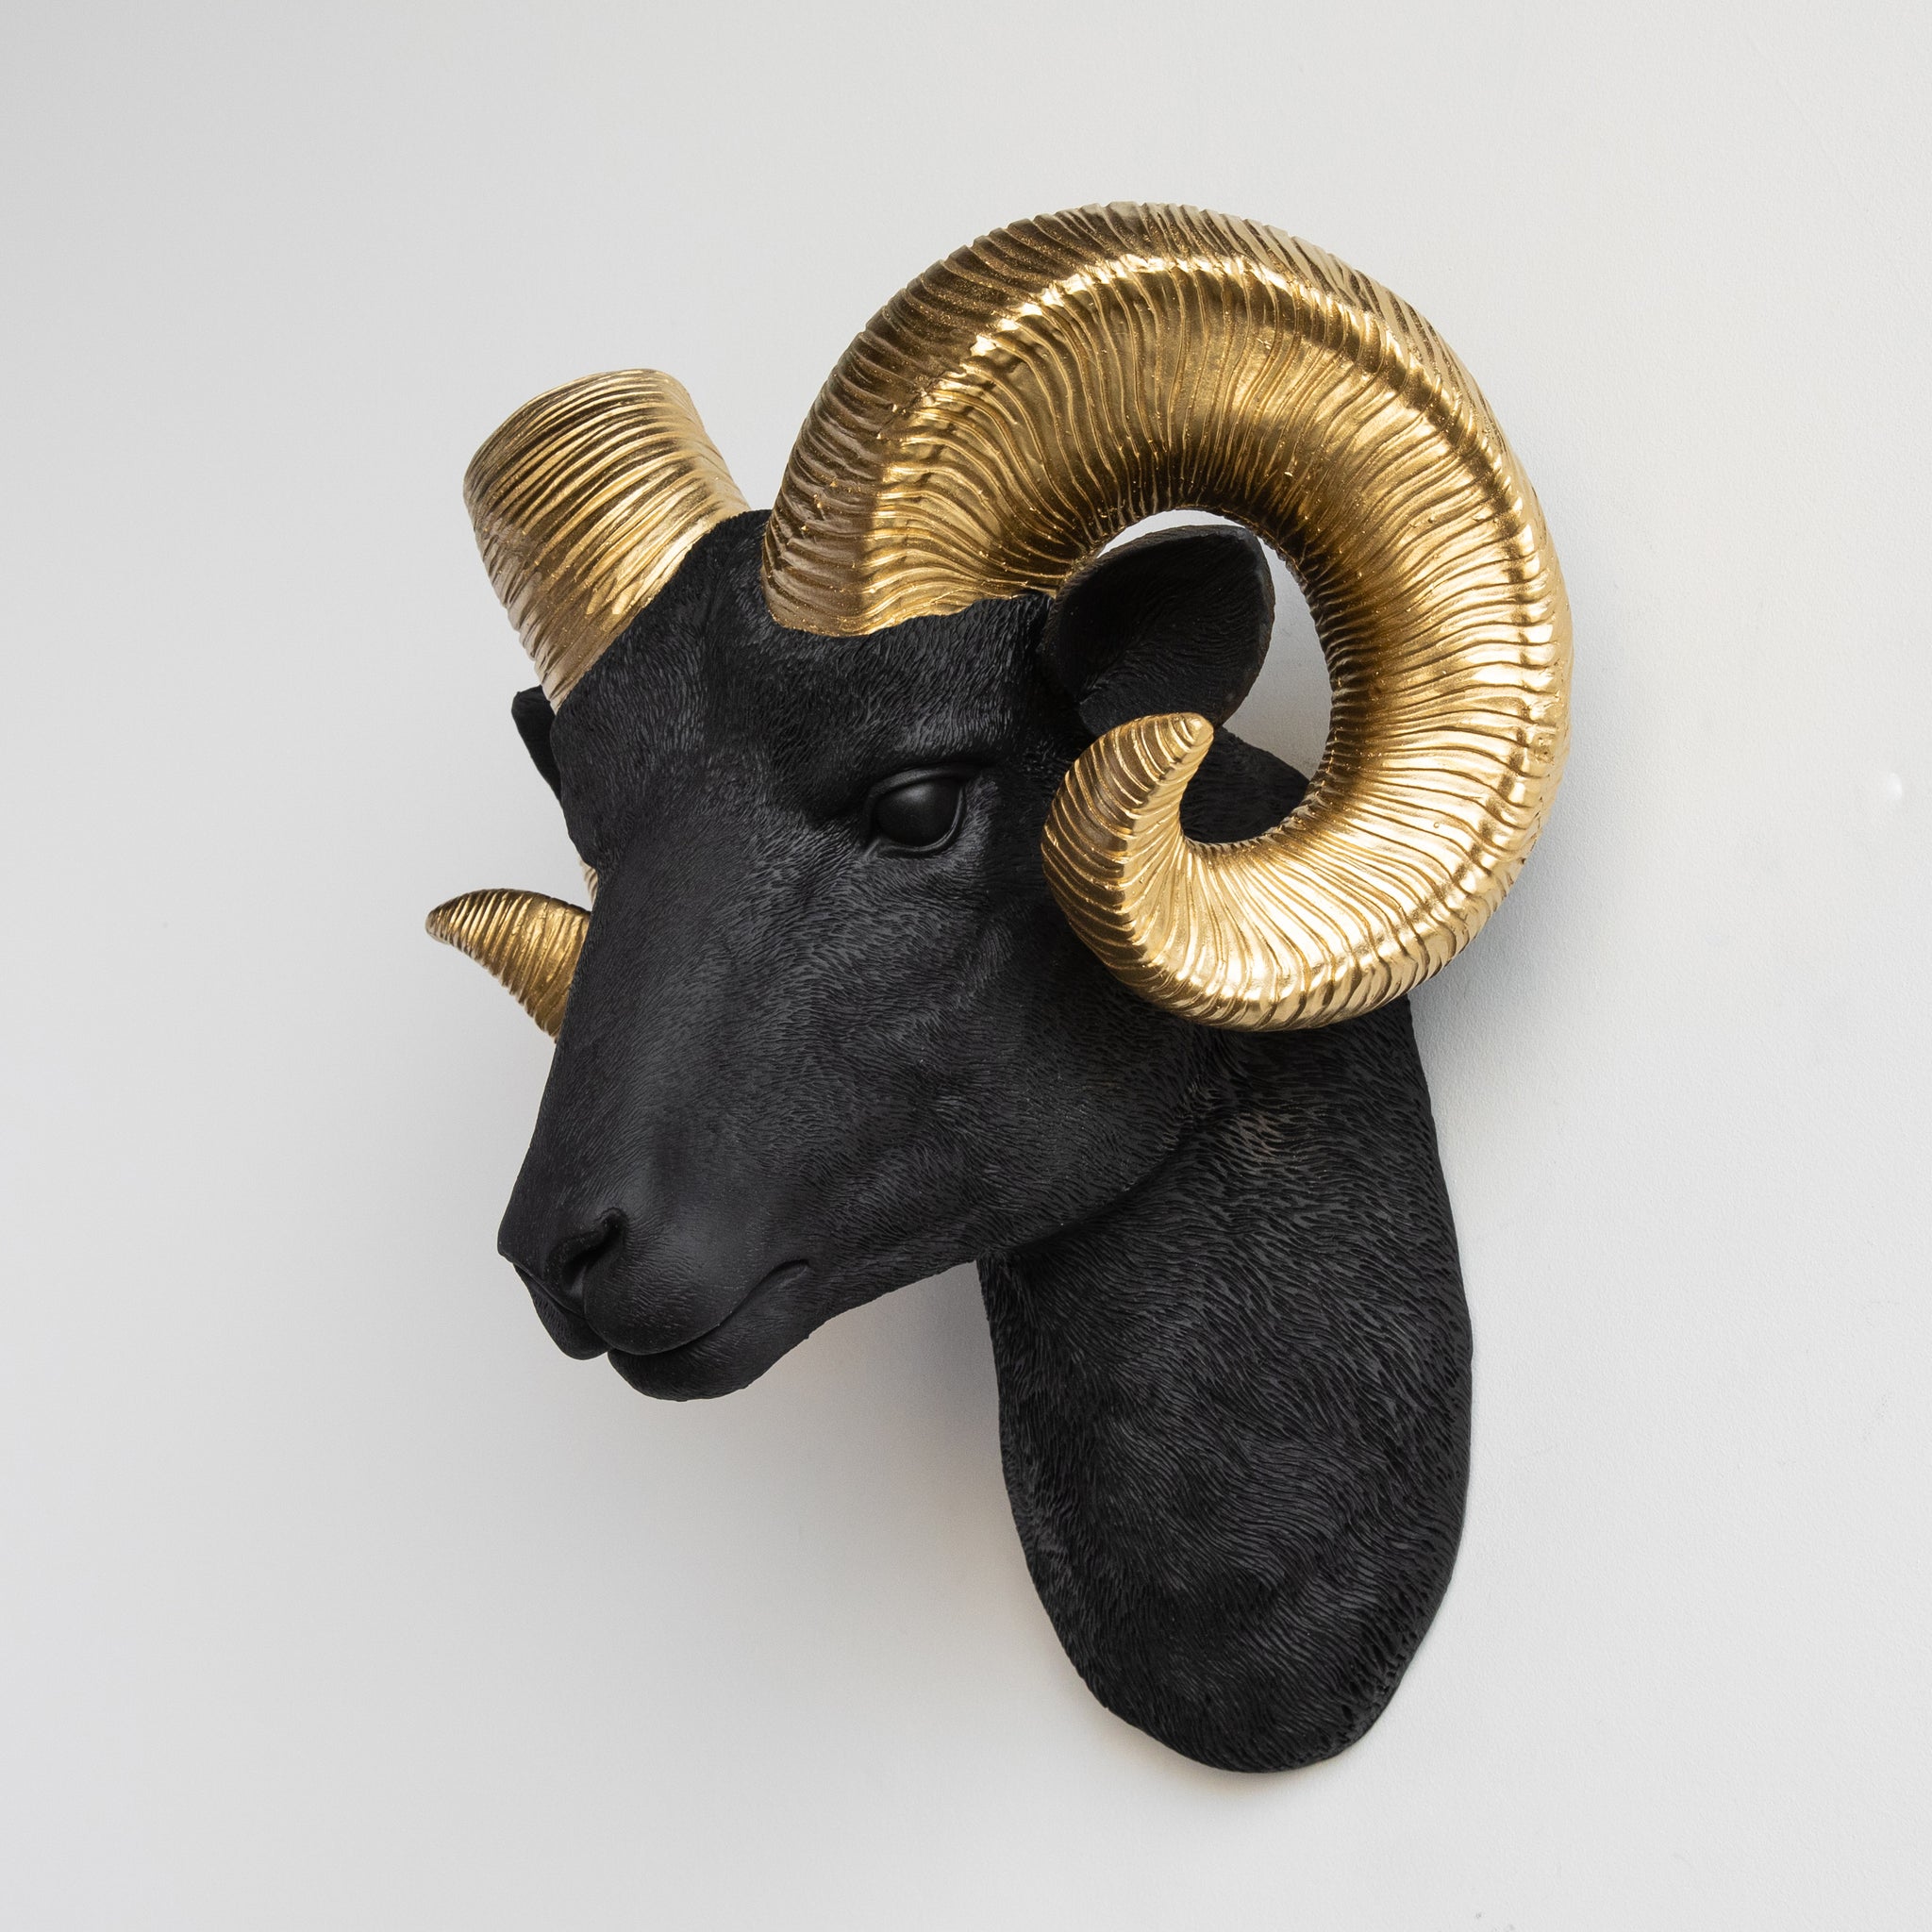 Faux Ram Wall Mount // Black with Gold Horns